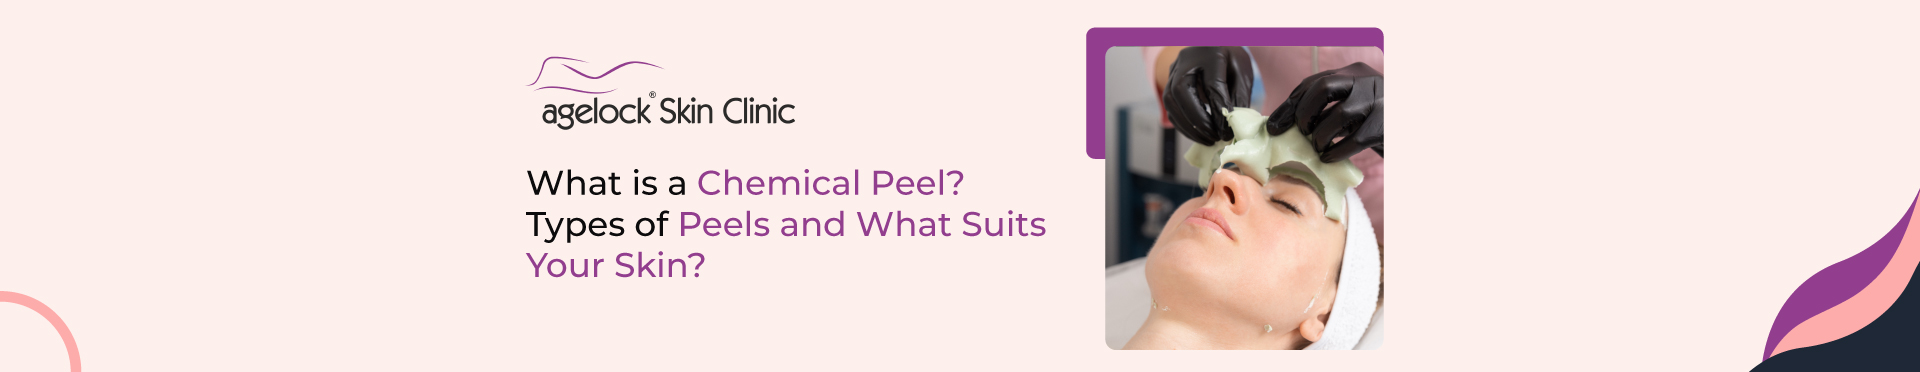 <strong>What is a Chemical Peel? Types of Peels and what suits your skin?</strong>